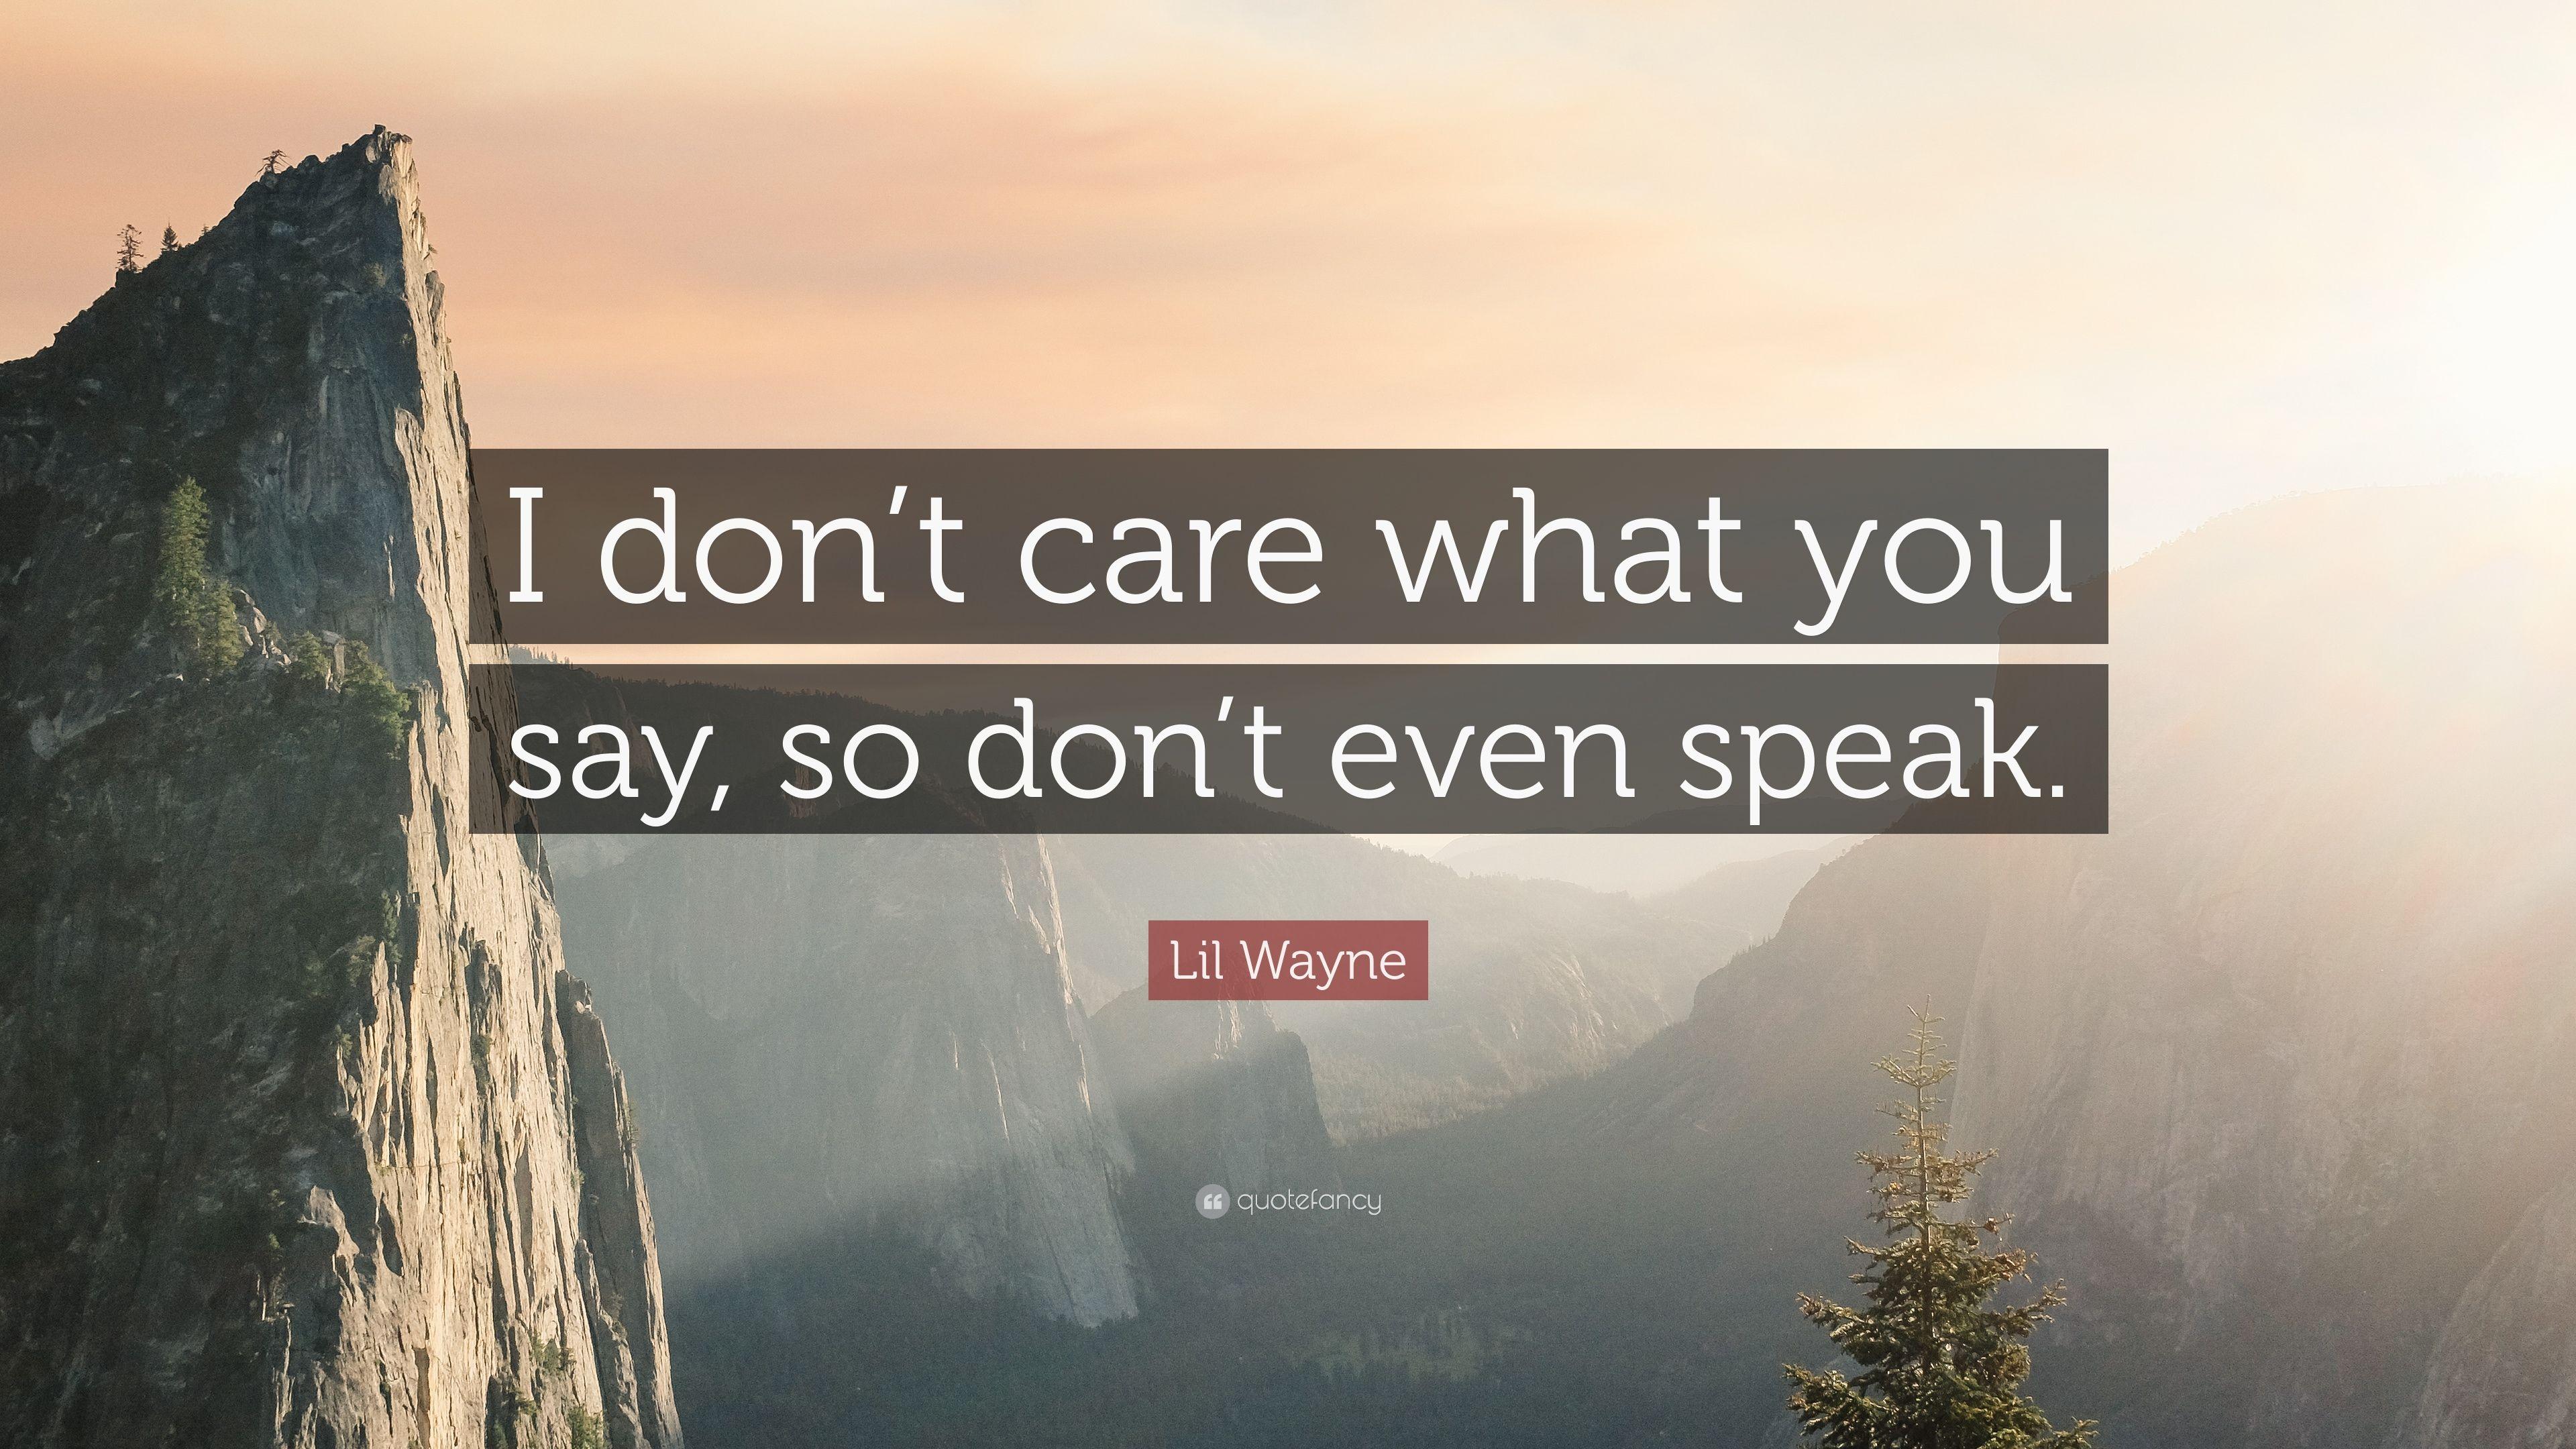 Lil Wayne Quote: “I don't care what you say, so don't even speak.” (12 wallpaper)